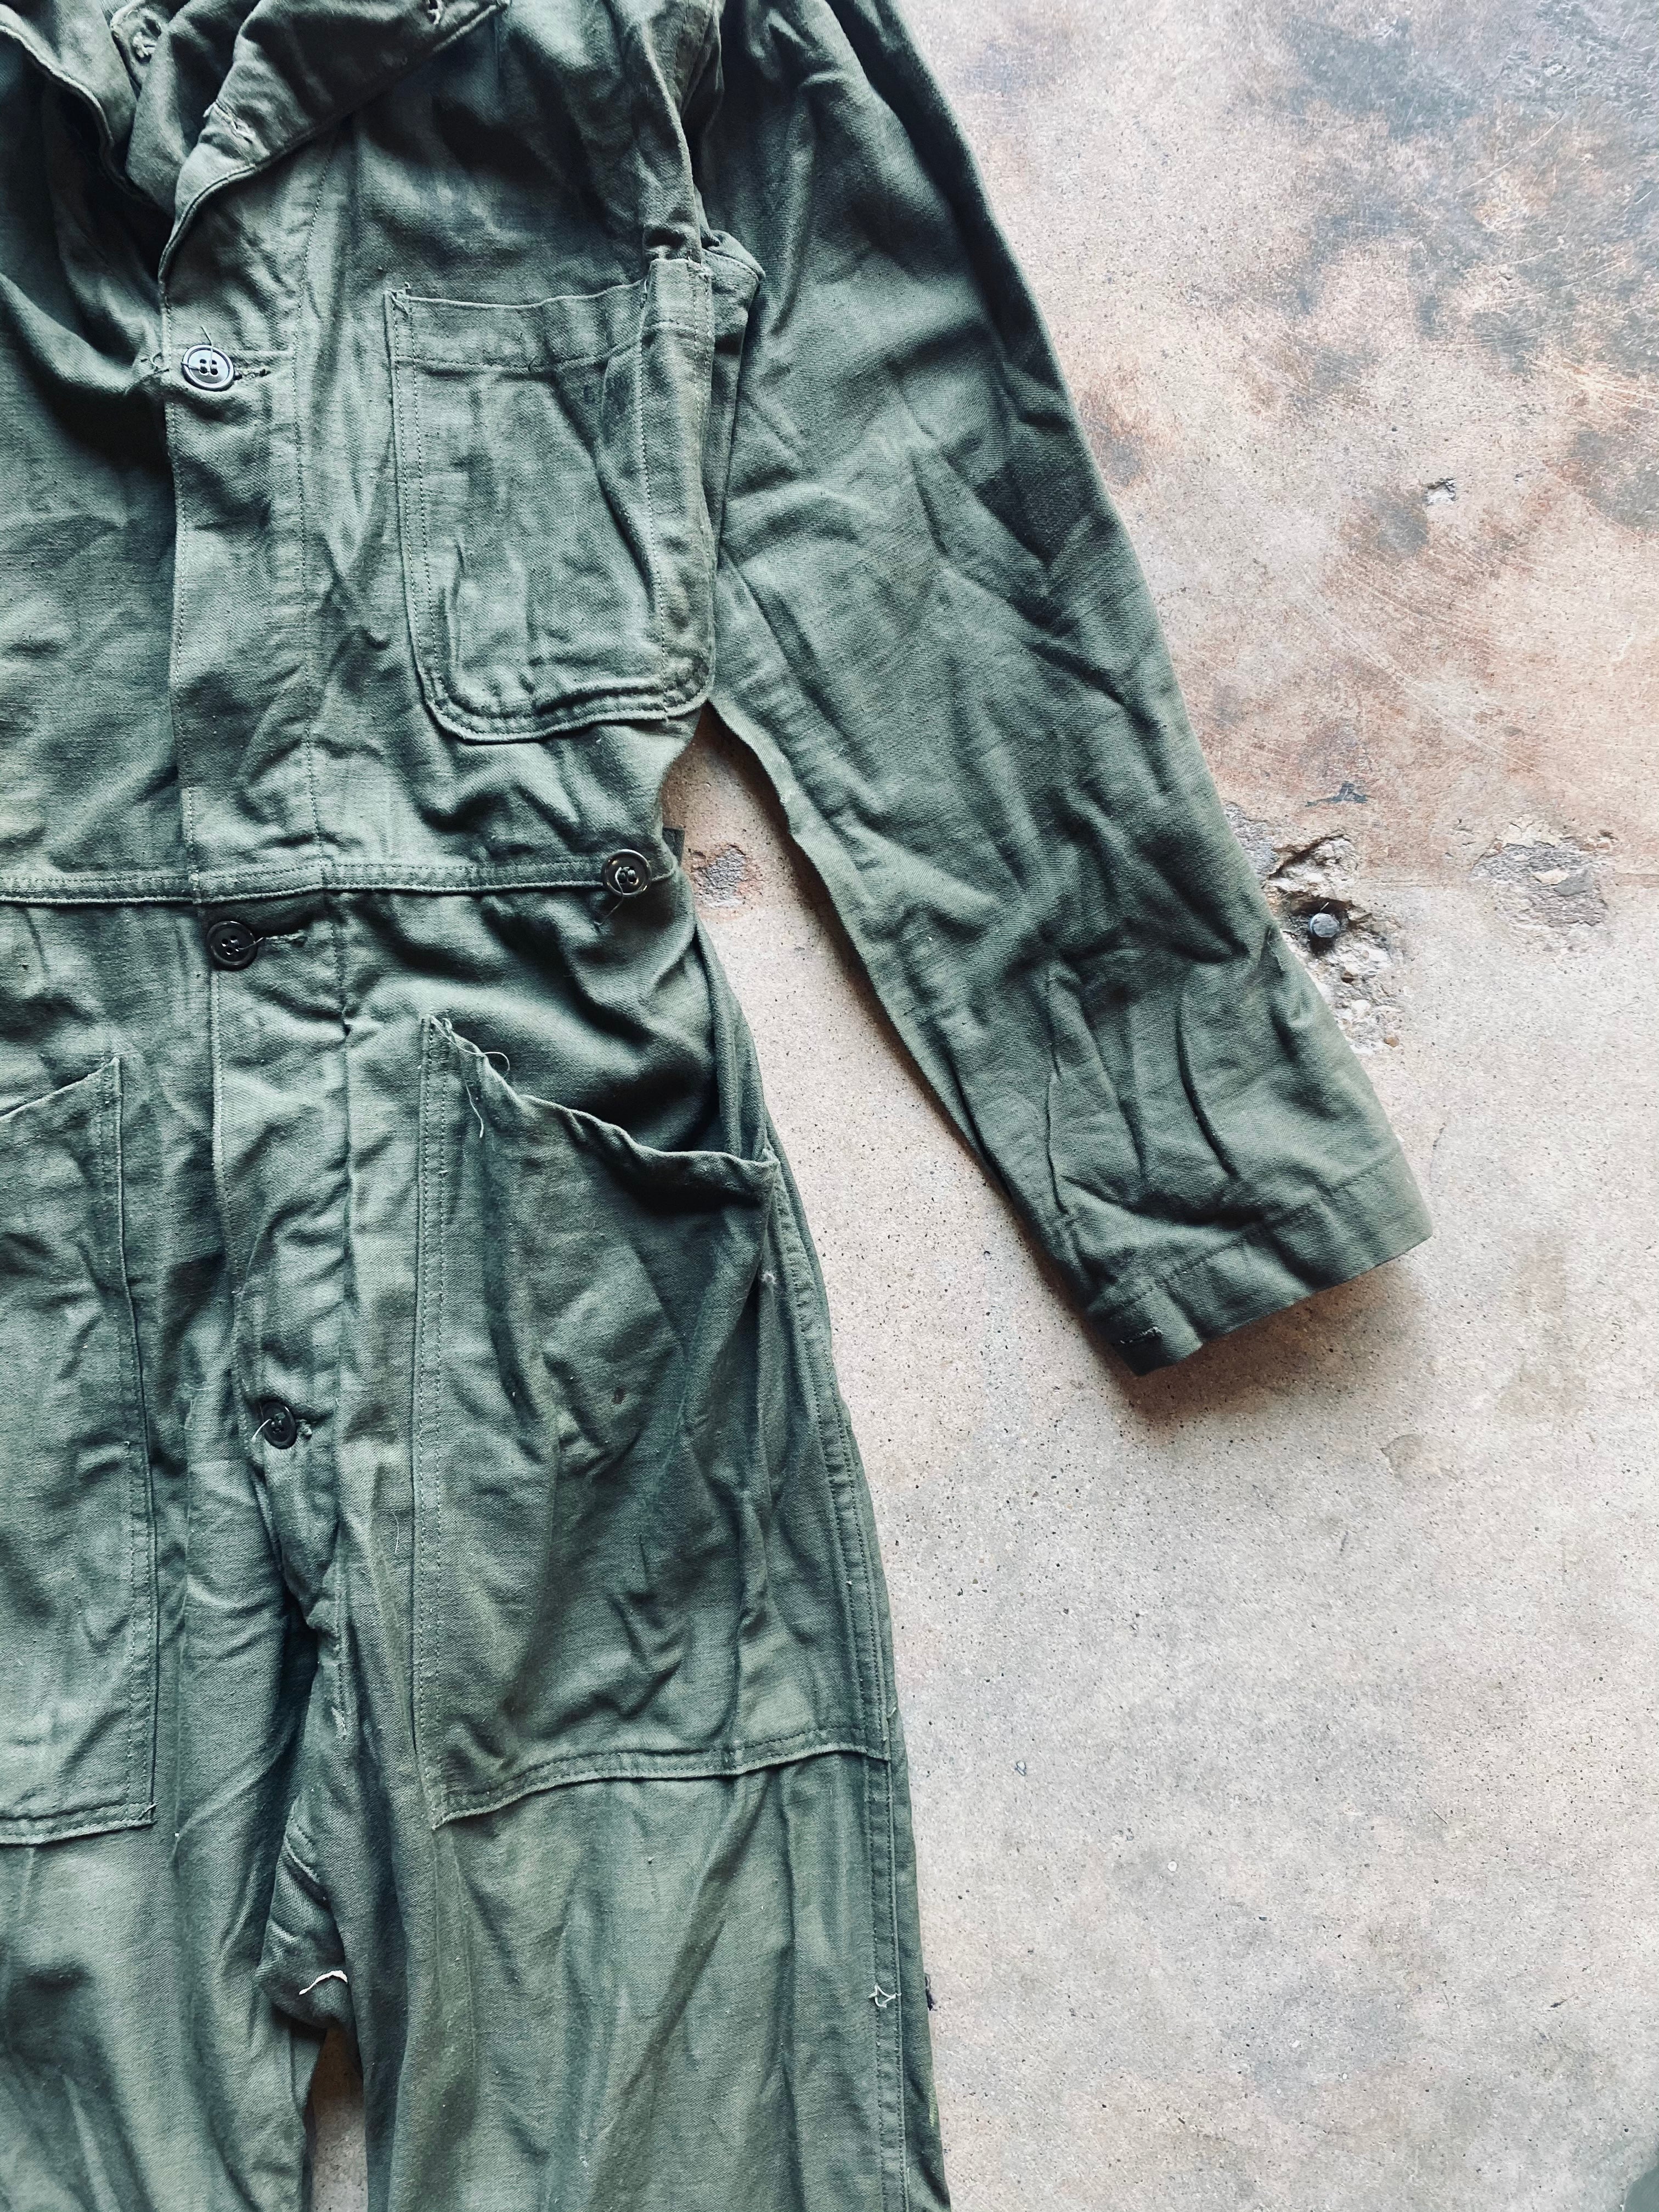 1974 OG-107 US Army Sateen Coveralls